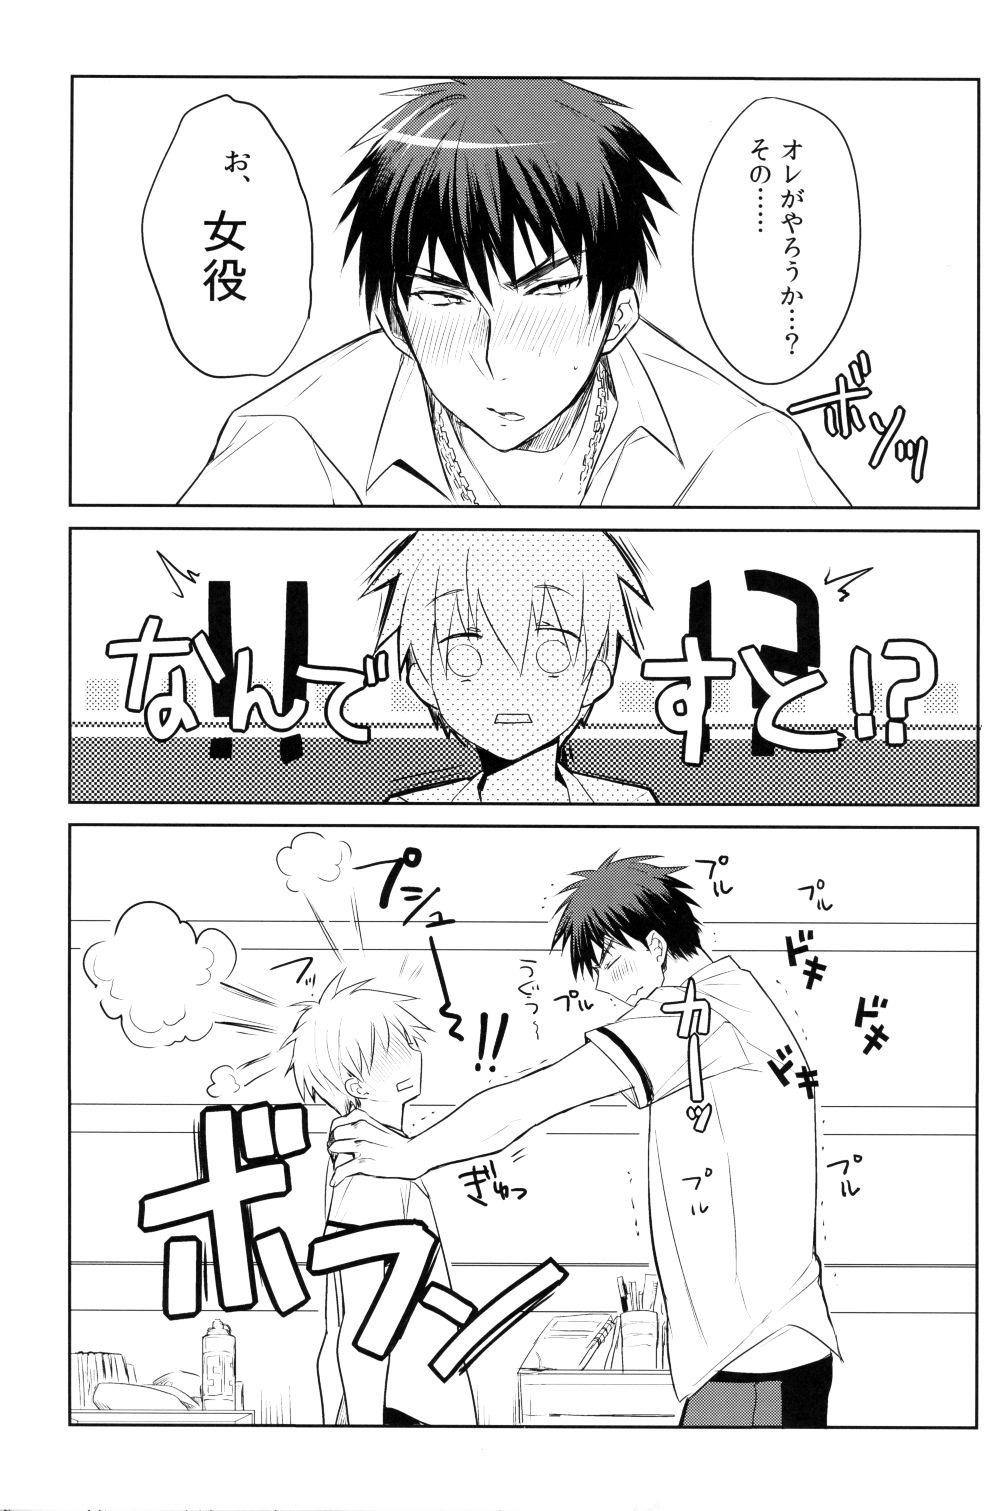 Kagami-kun's Thing is Amazing!! 13